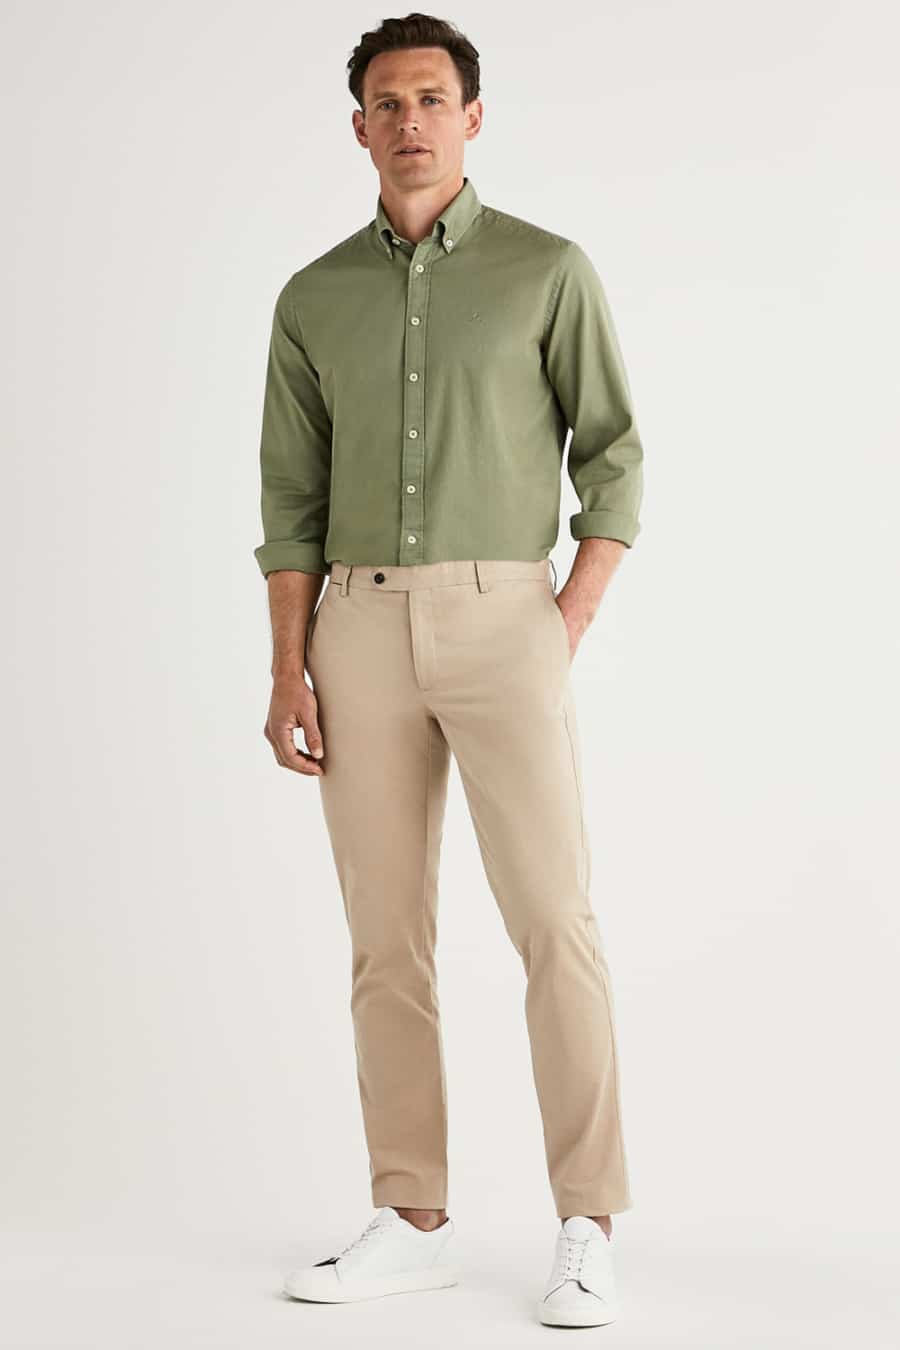 Men's khaki pants, green Oxford shirt and white sneakers outfit